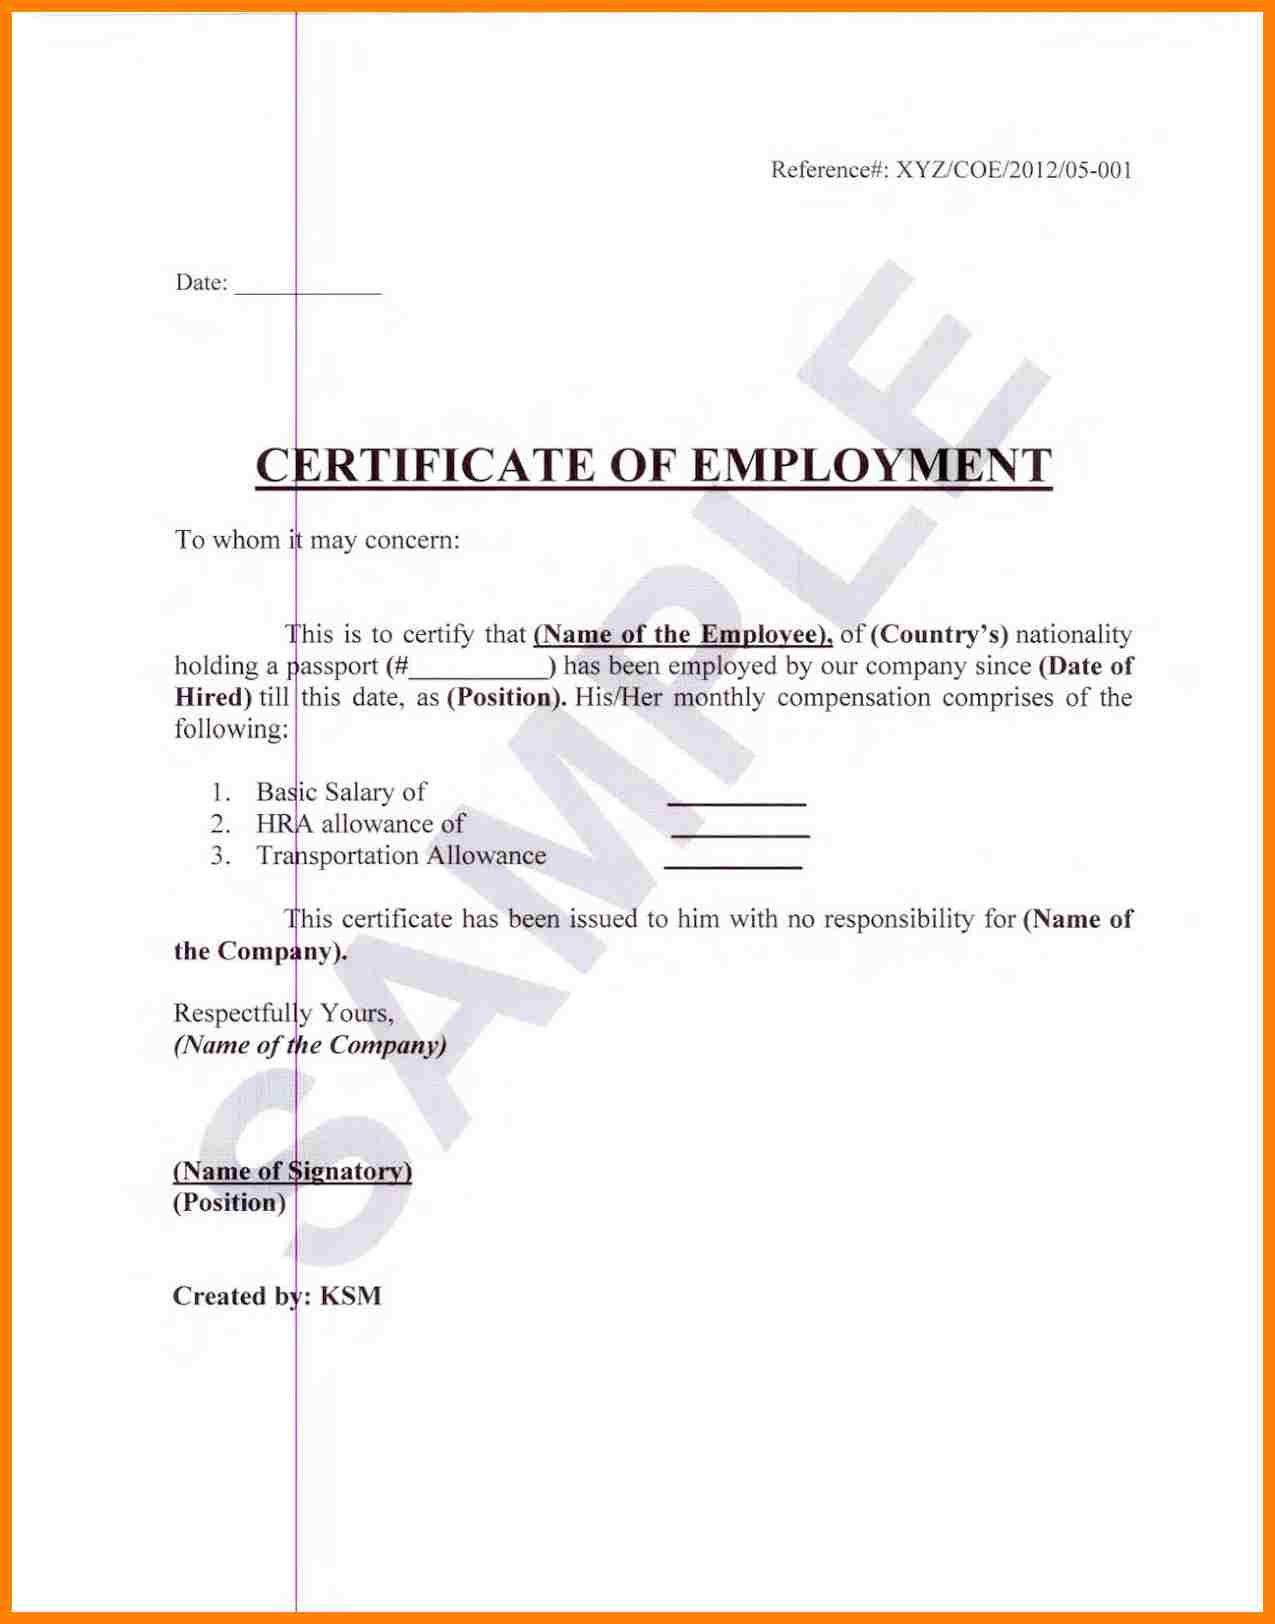 Sample Certification Employment Certificate Tugon Med Clinic Within Template Of Certificate Of Employment